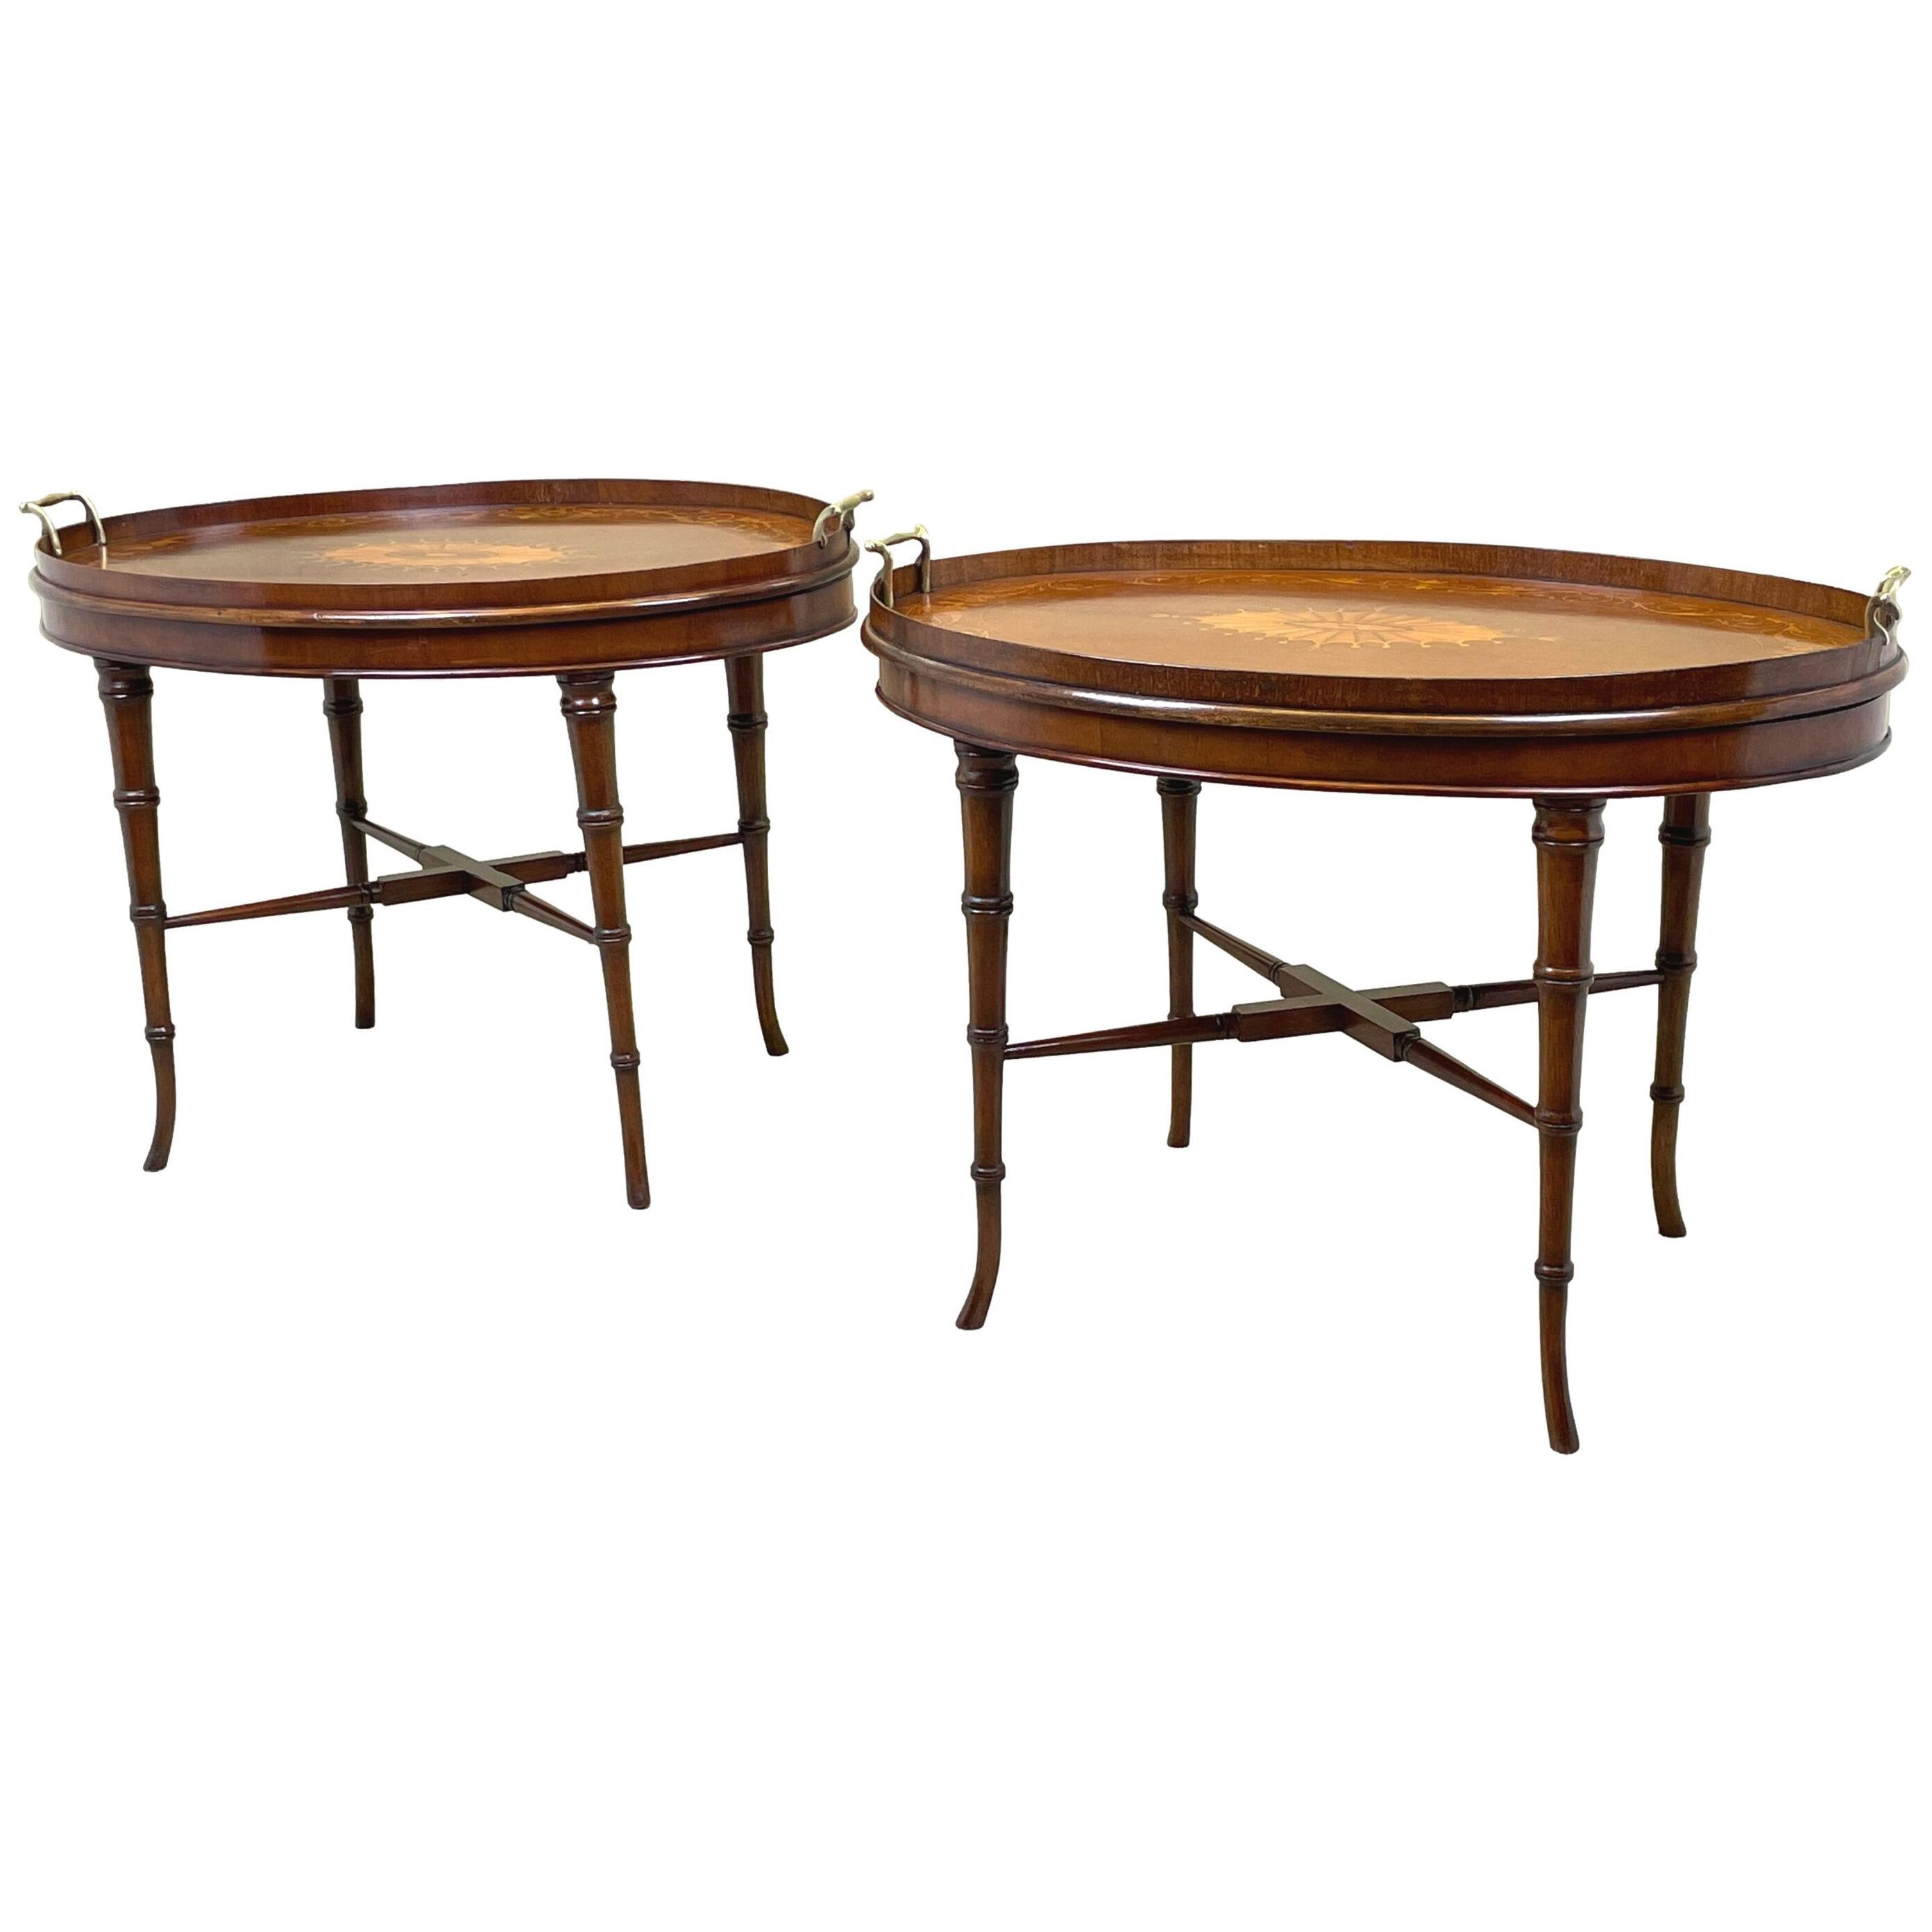 Pair Of Mahogany Tray On Stands